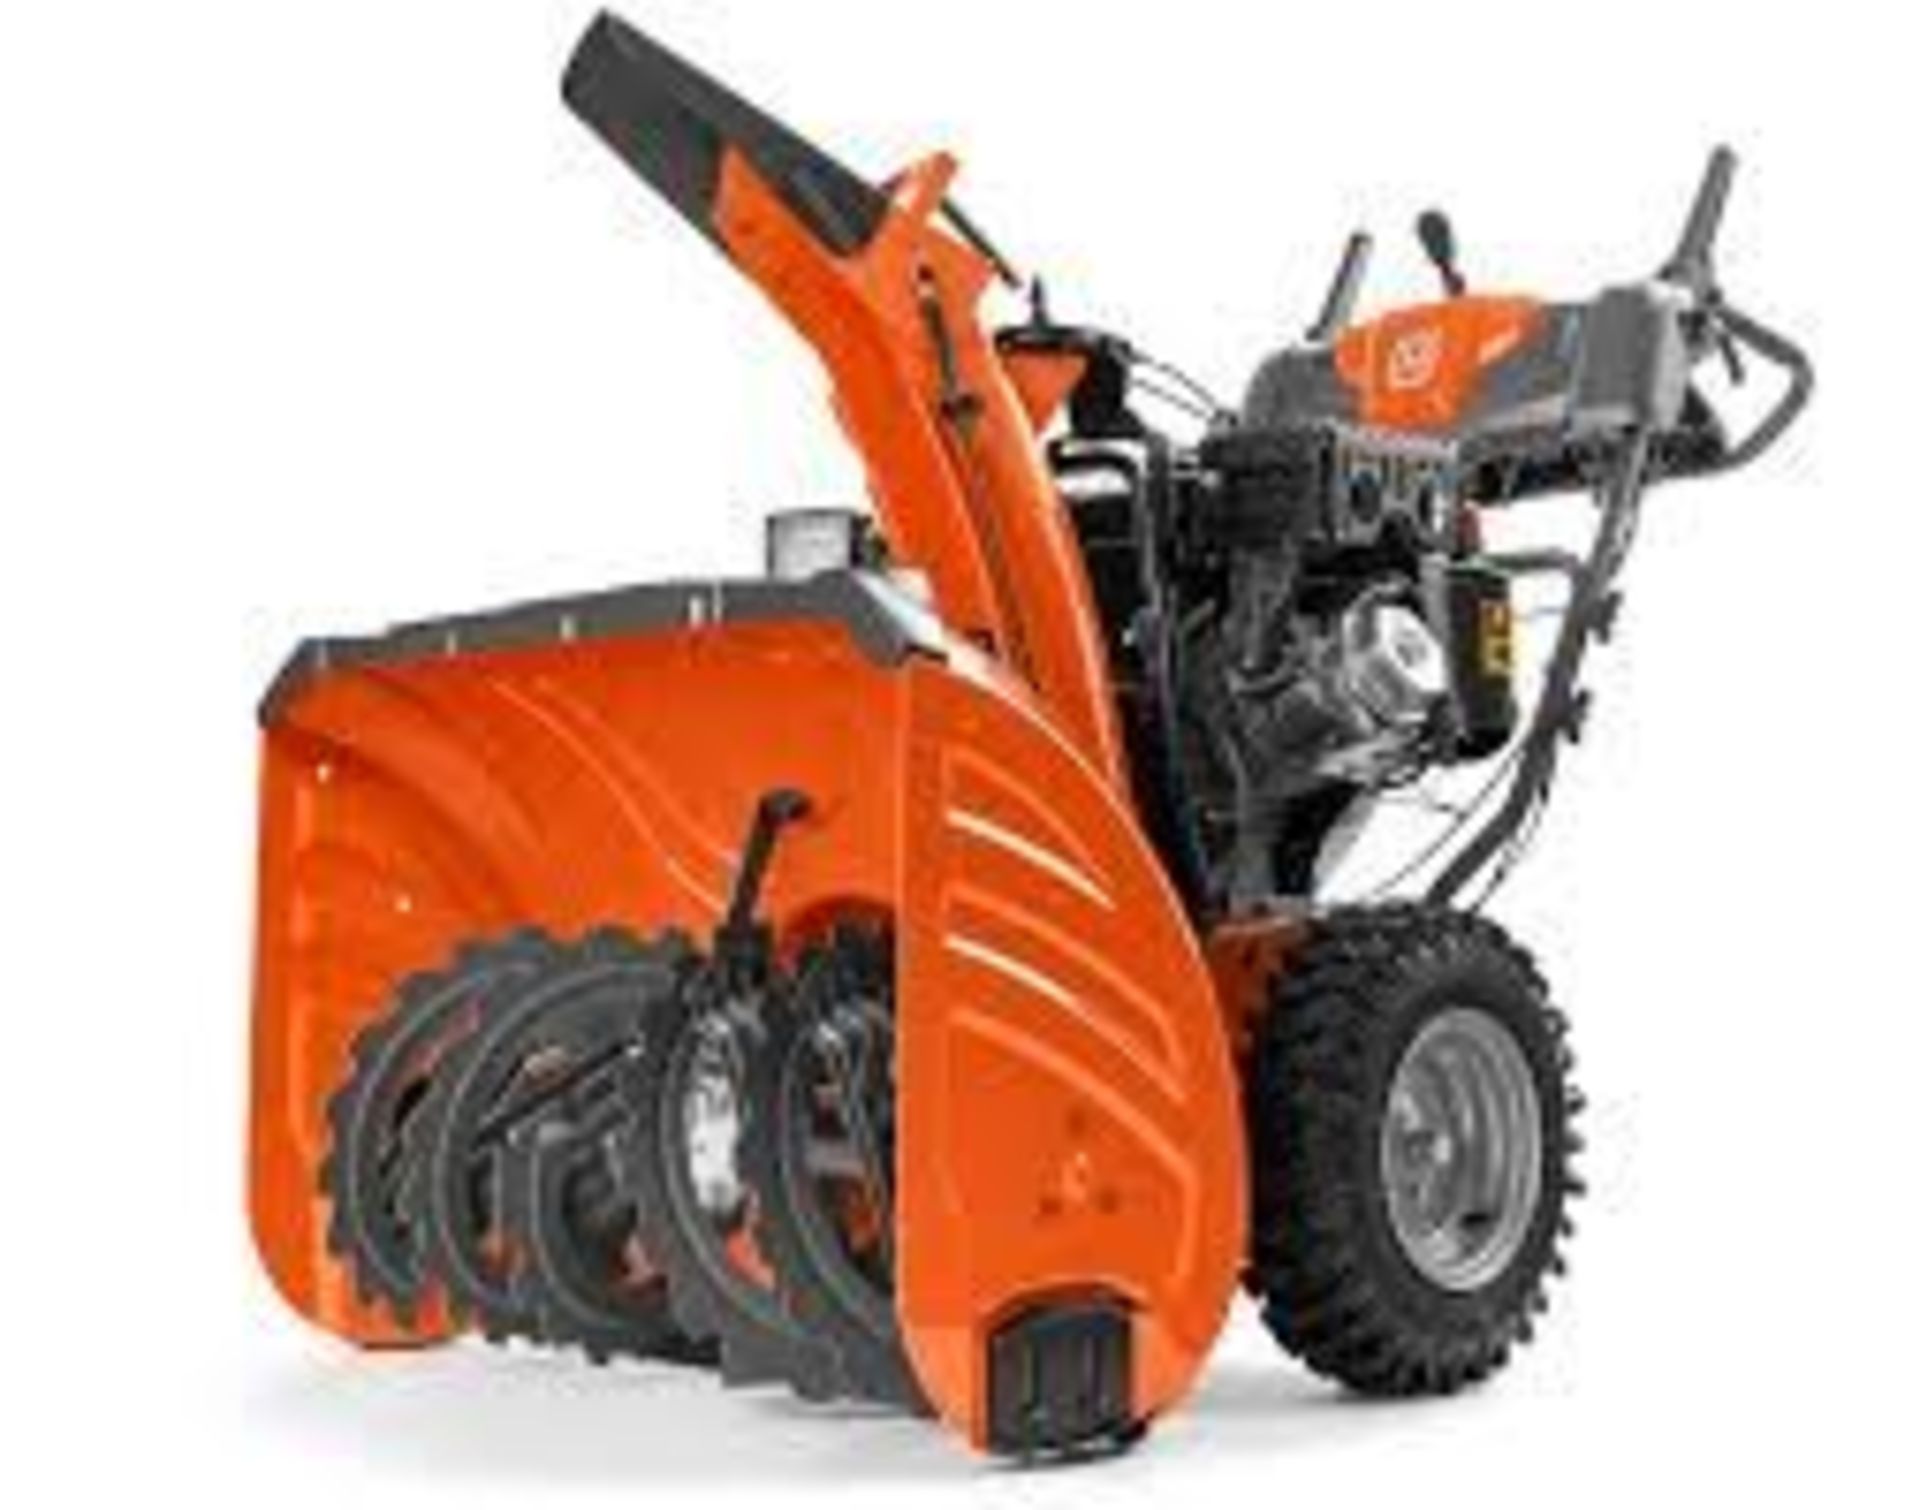 Husqvarna ST 330 Self Propelled Snow Blower - Approx. MSRP $1599 - Image 2 of 5